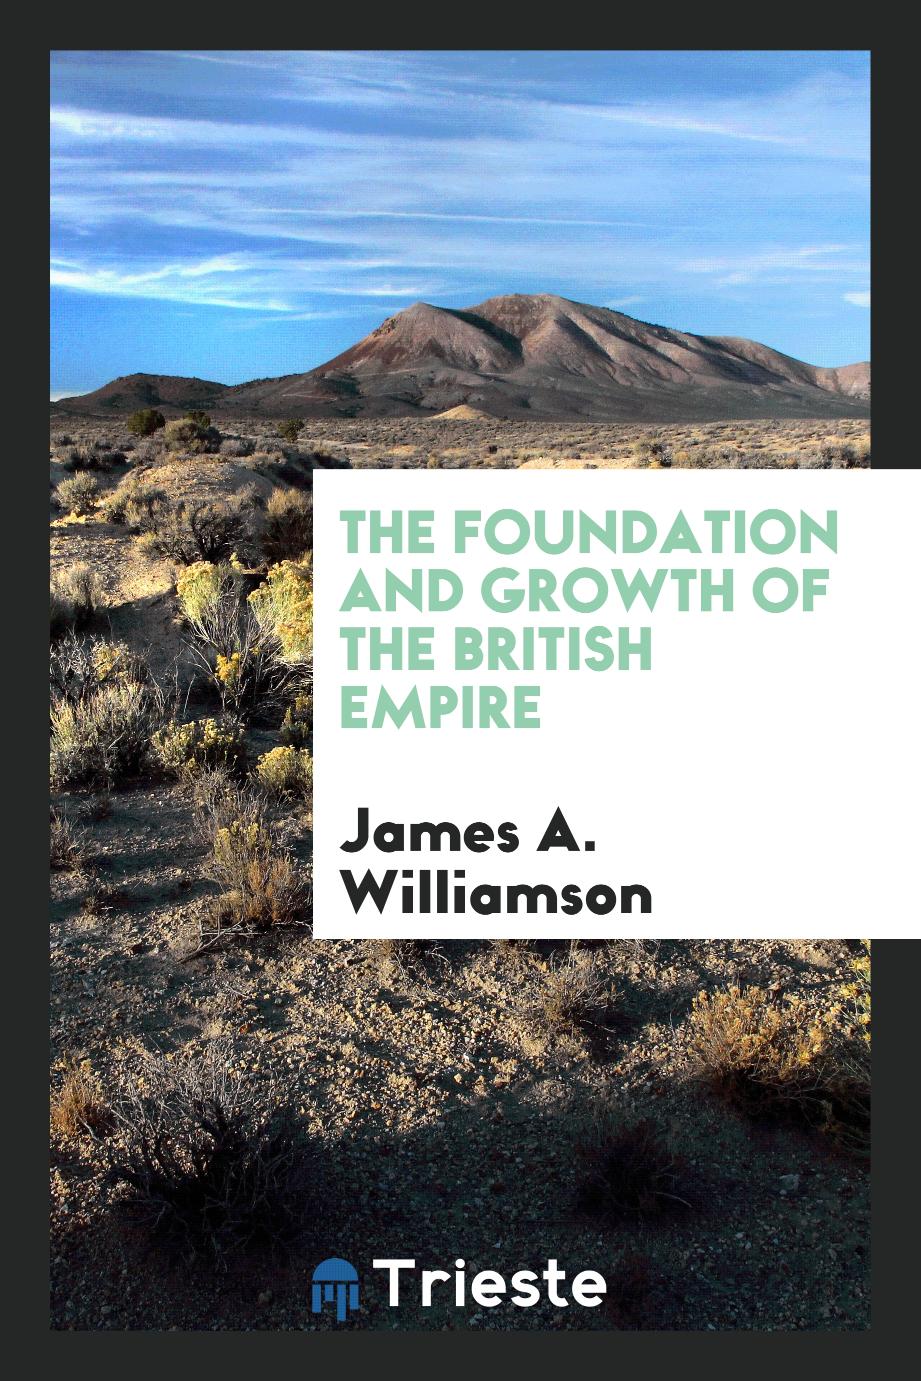 The Foundation and Growth of the British Empire